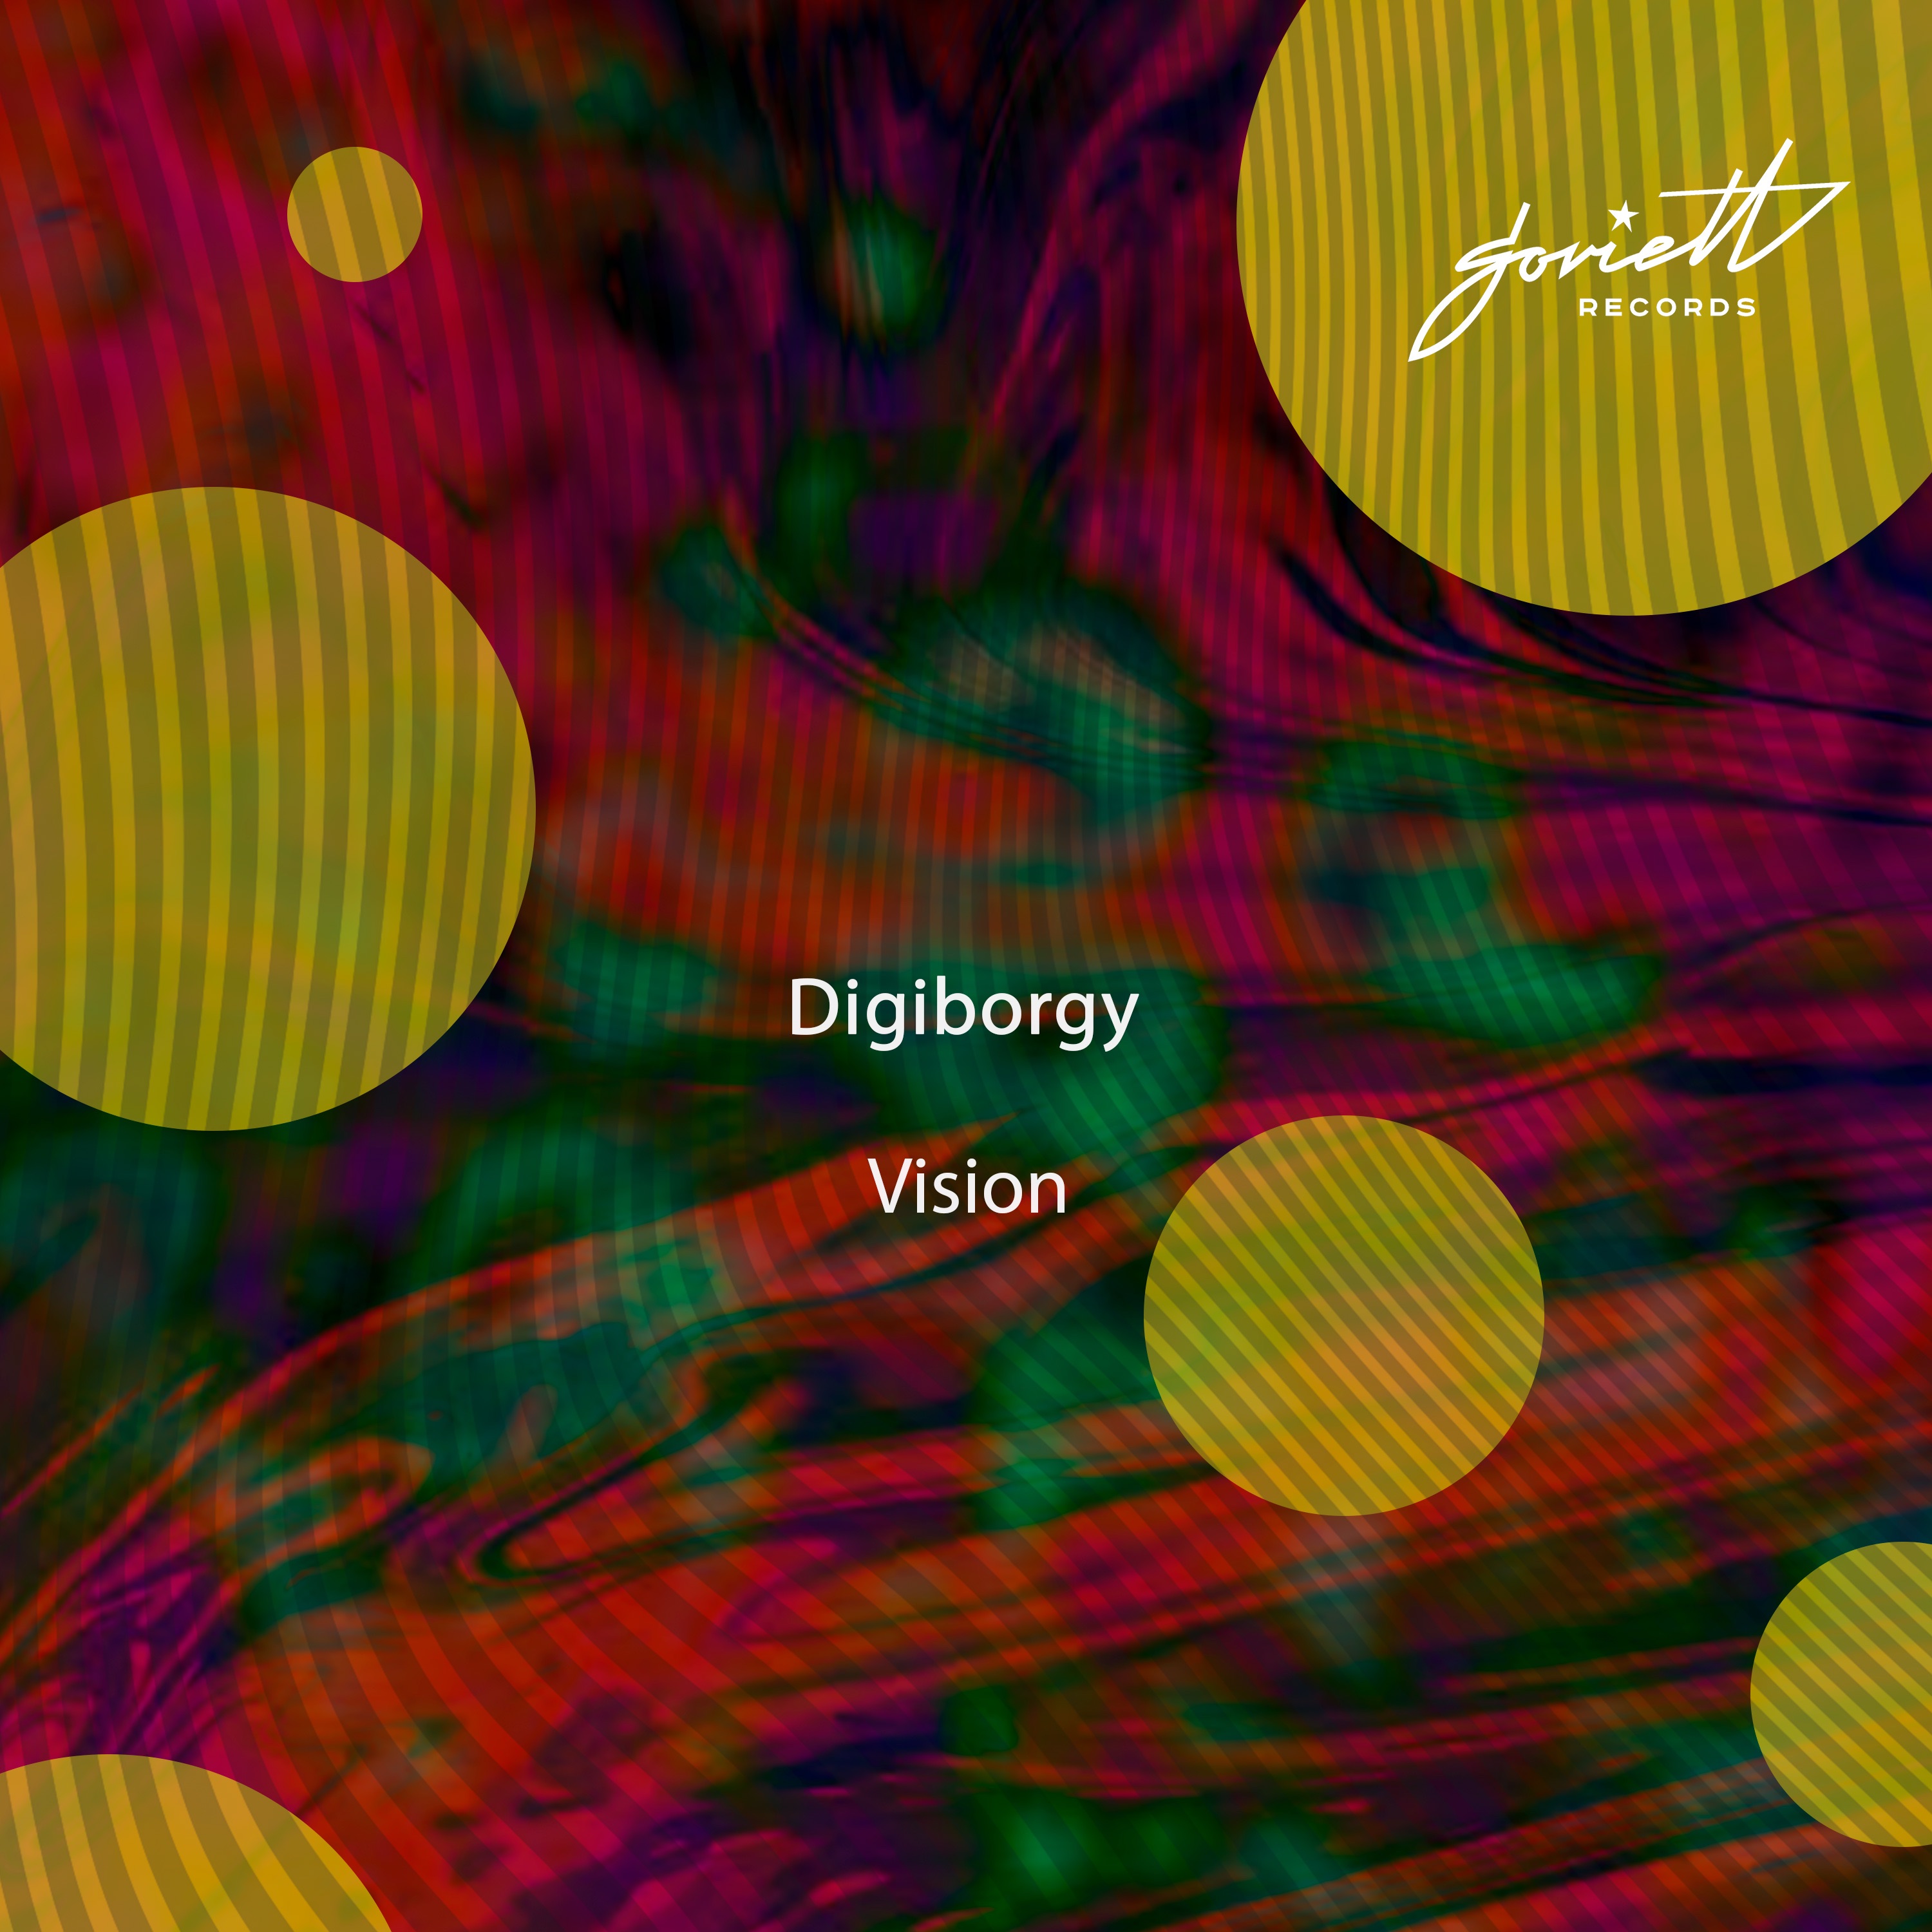 Download Digiborgy - Vision